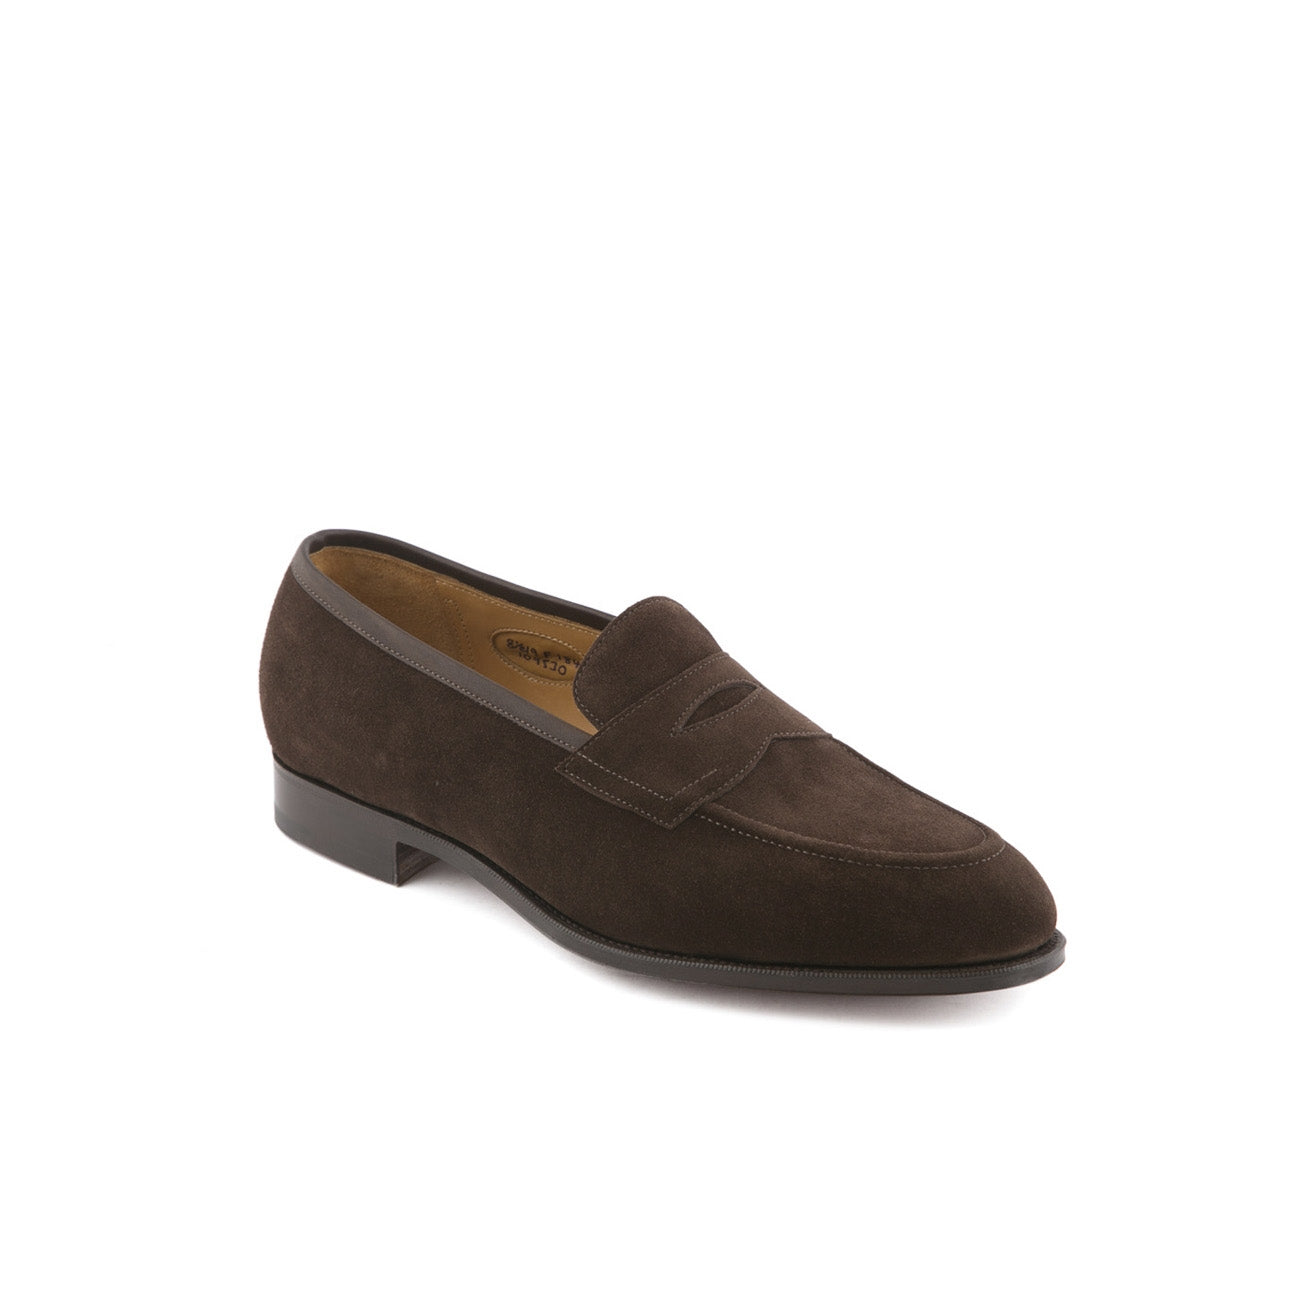 Edward Green Piccadilly penny loafer moccasin in brown suede – Borghini